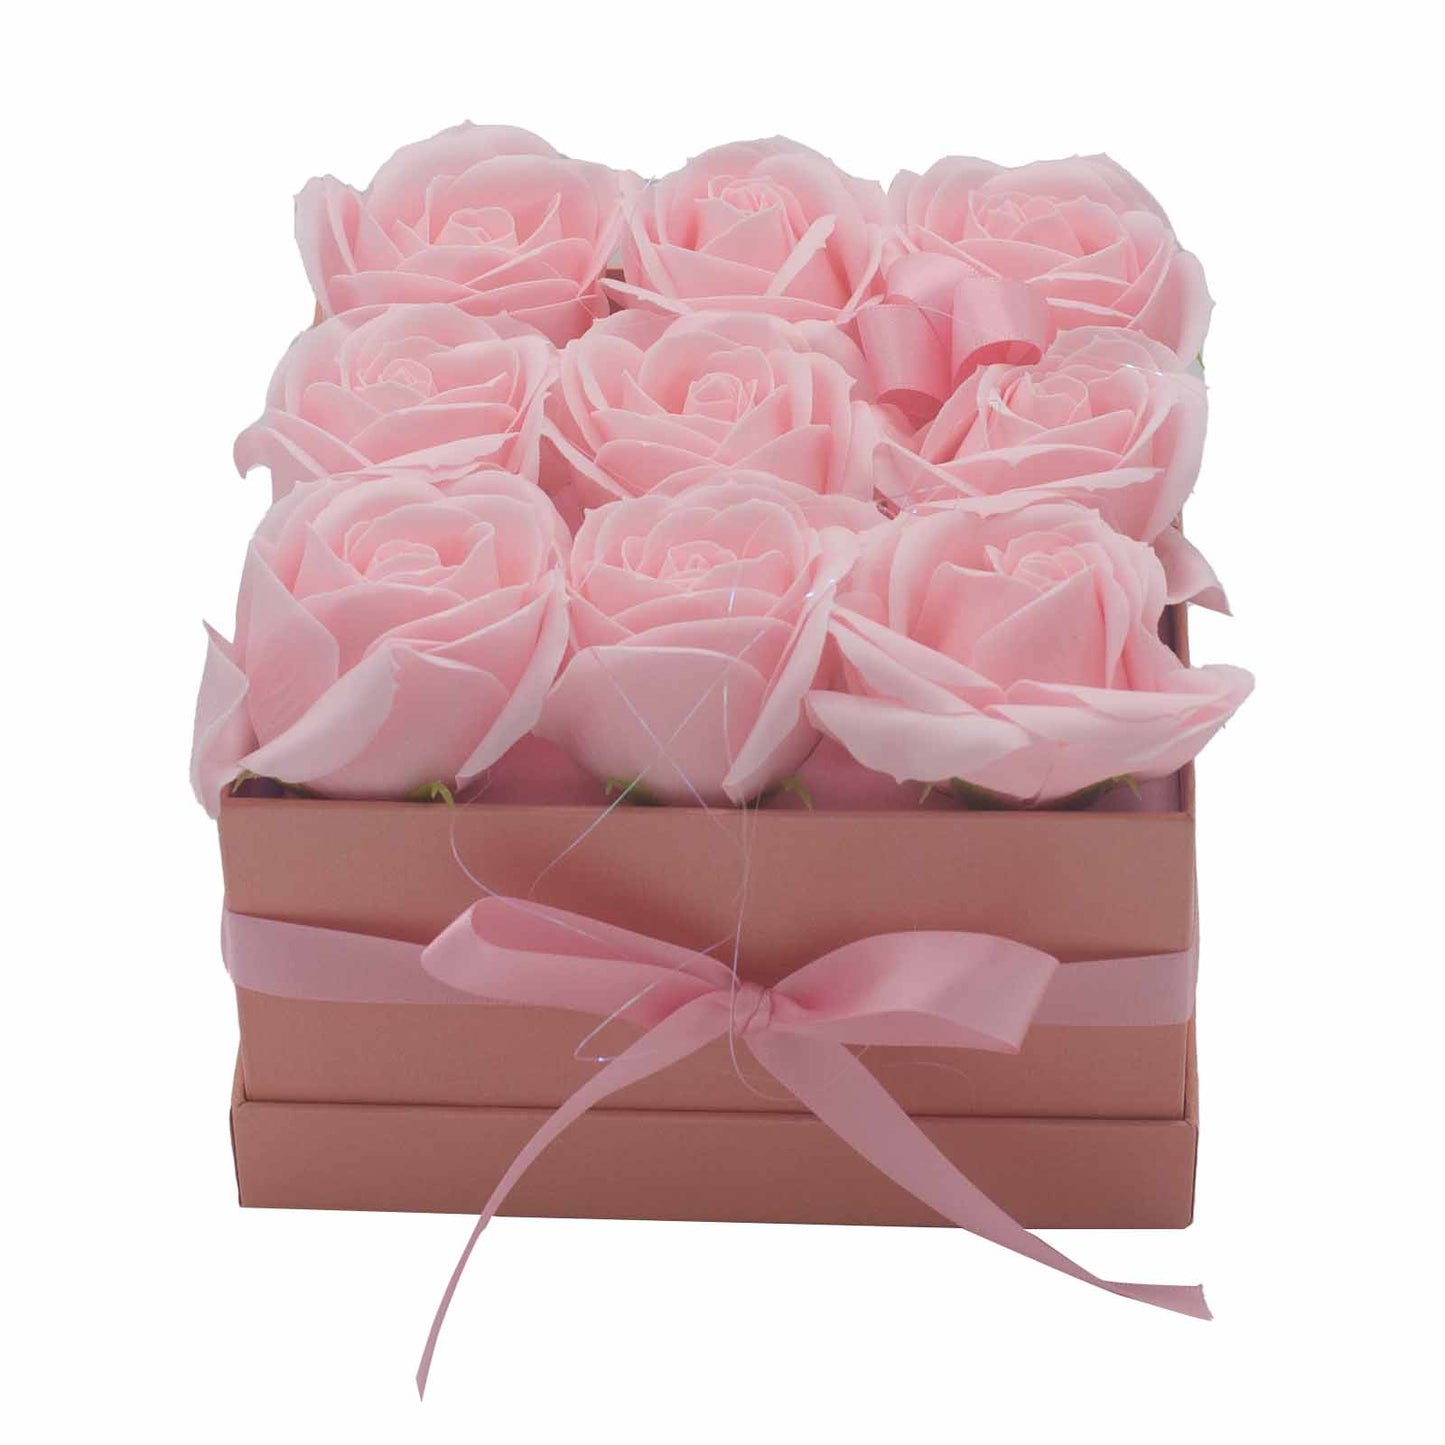 Soap Flower Bouquet - Pink Roses - Square